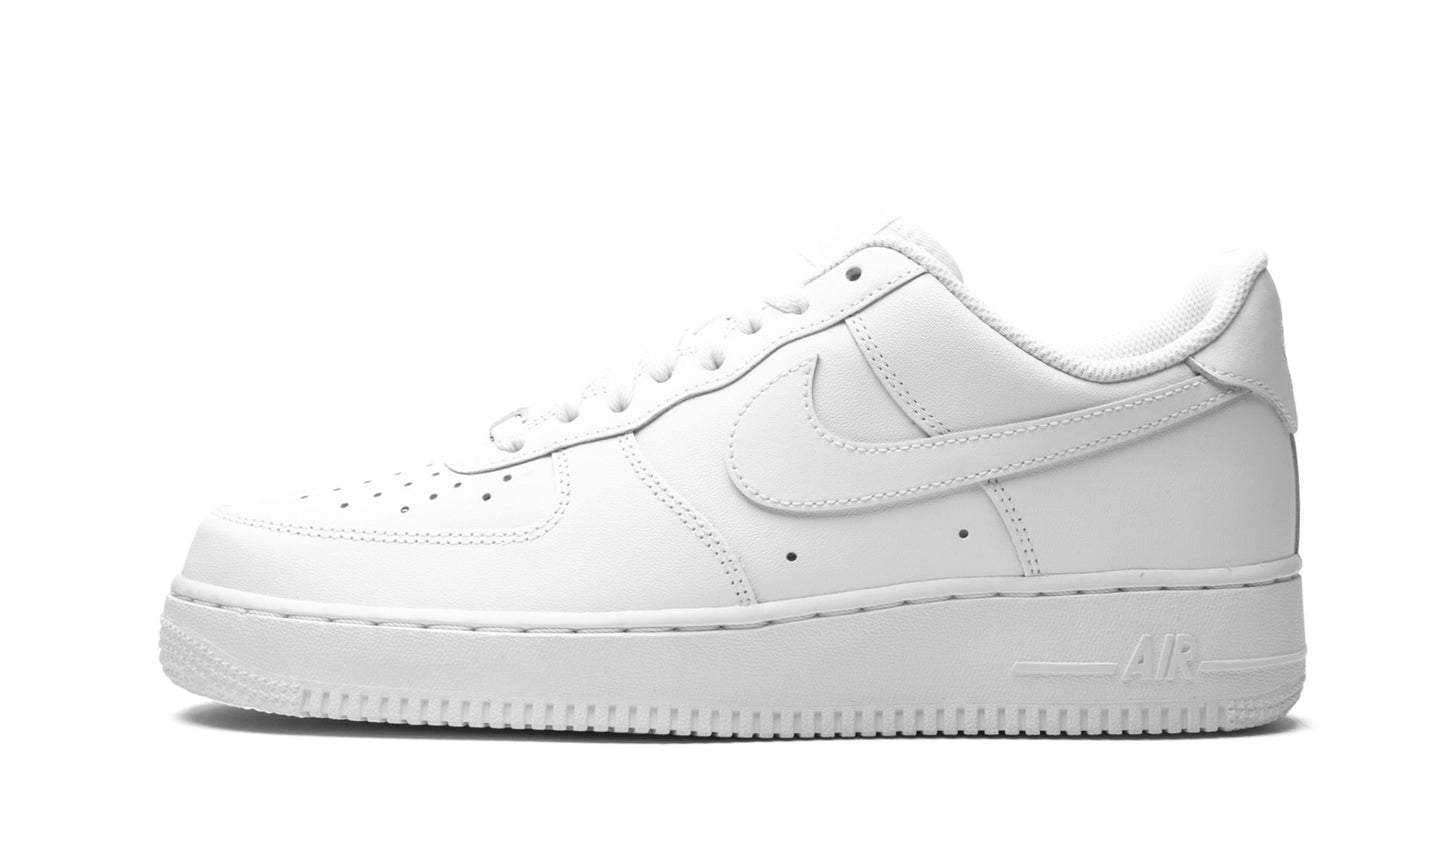 Air Force 1 Low '07 "White on White"